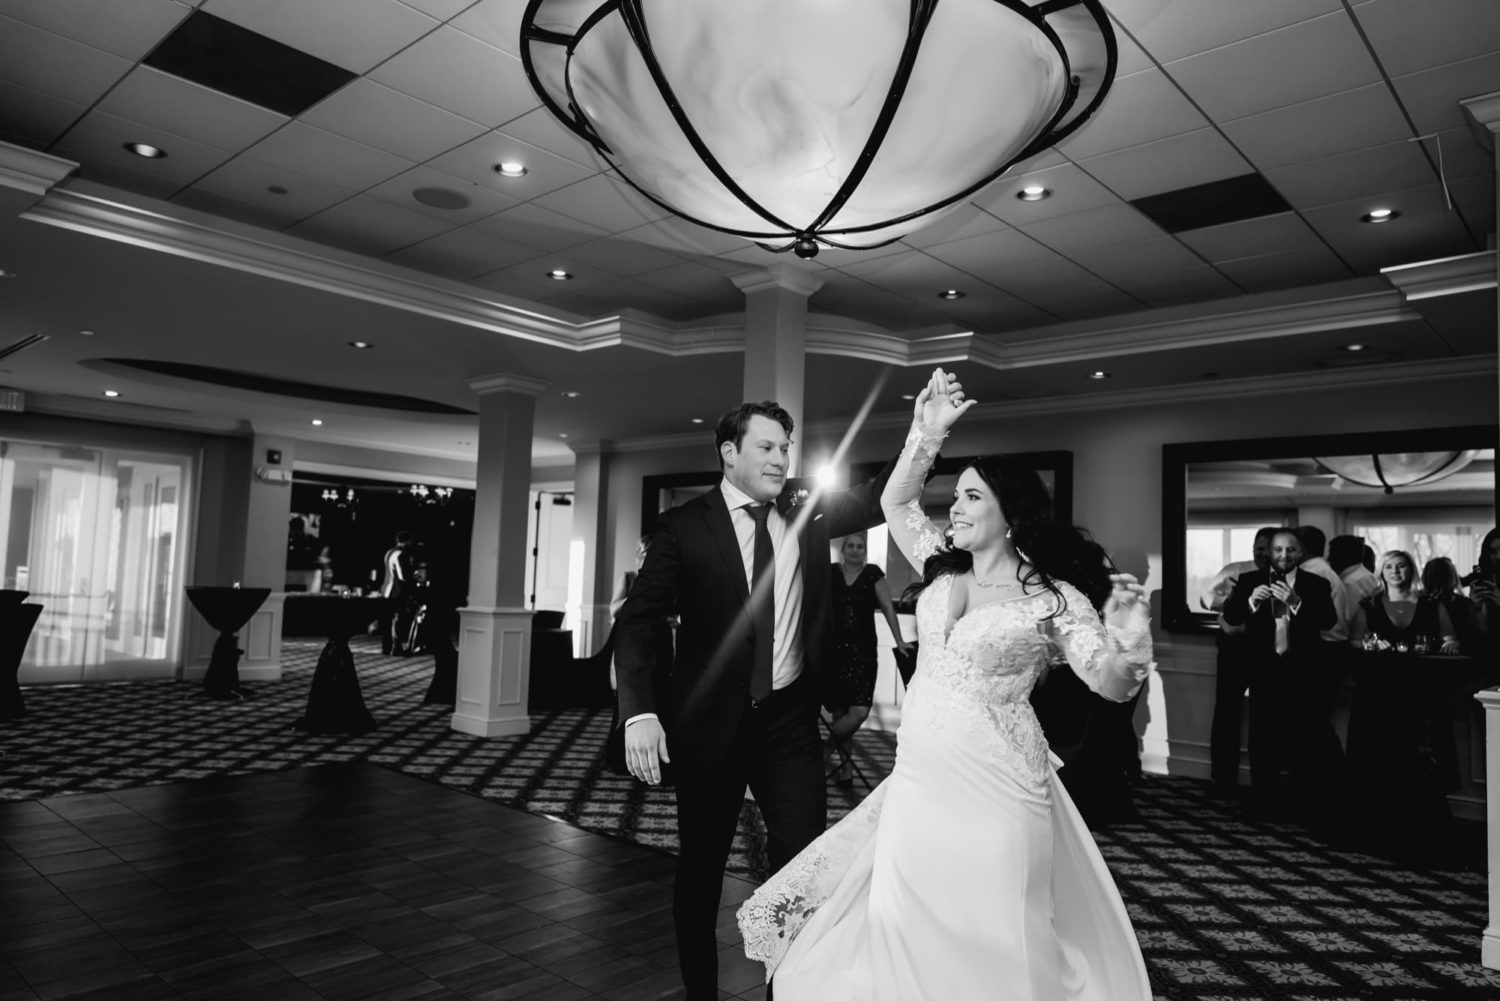 Bride and groom epic first dance photo off camera lighting Glen Oaks country club